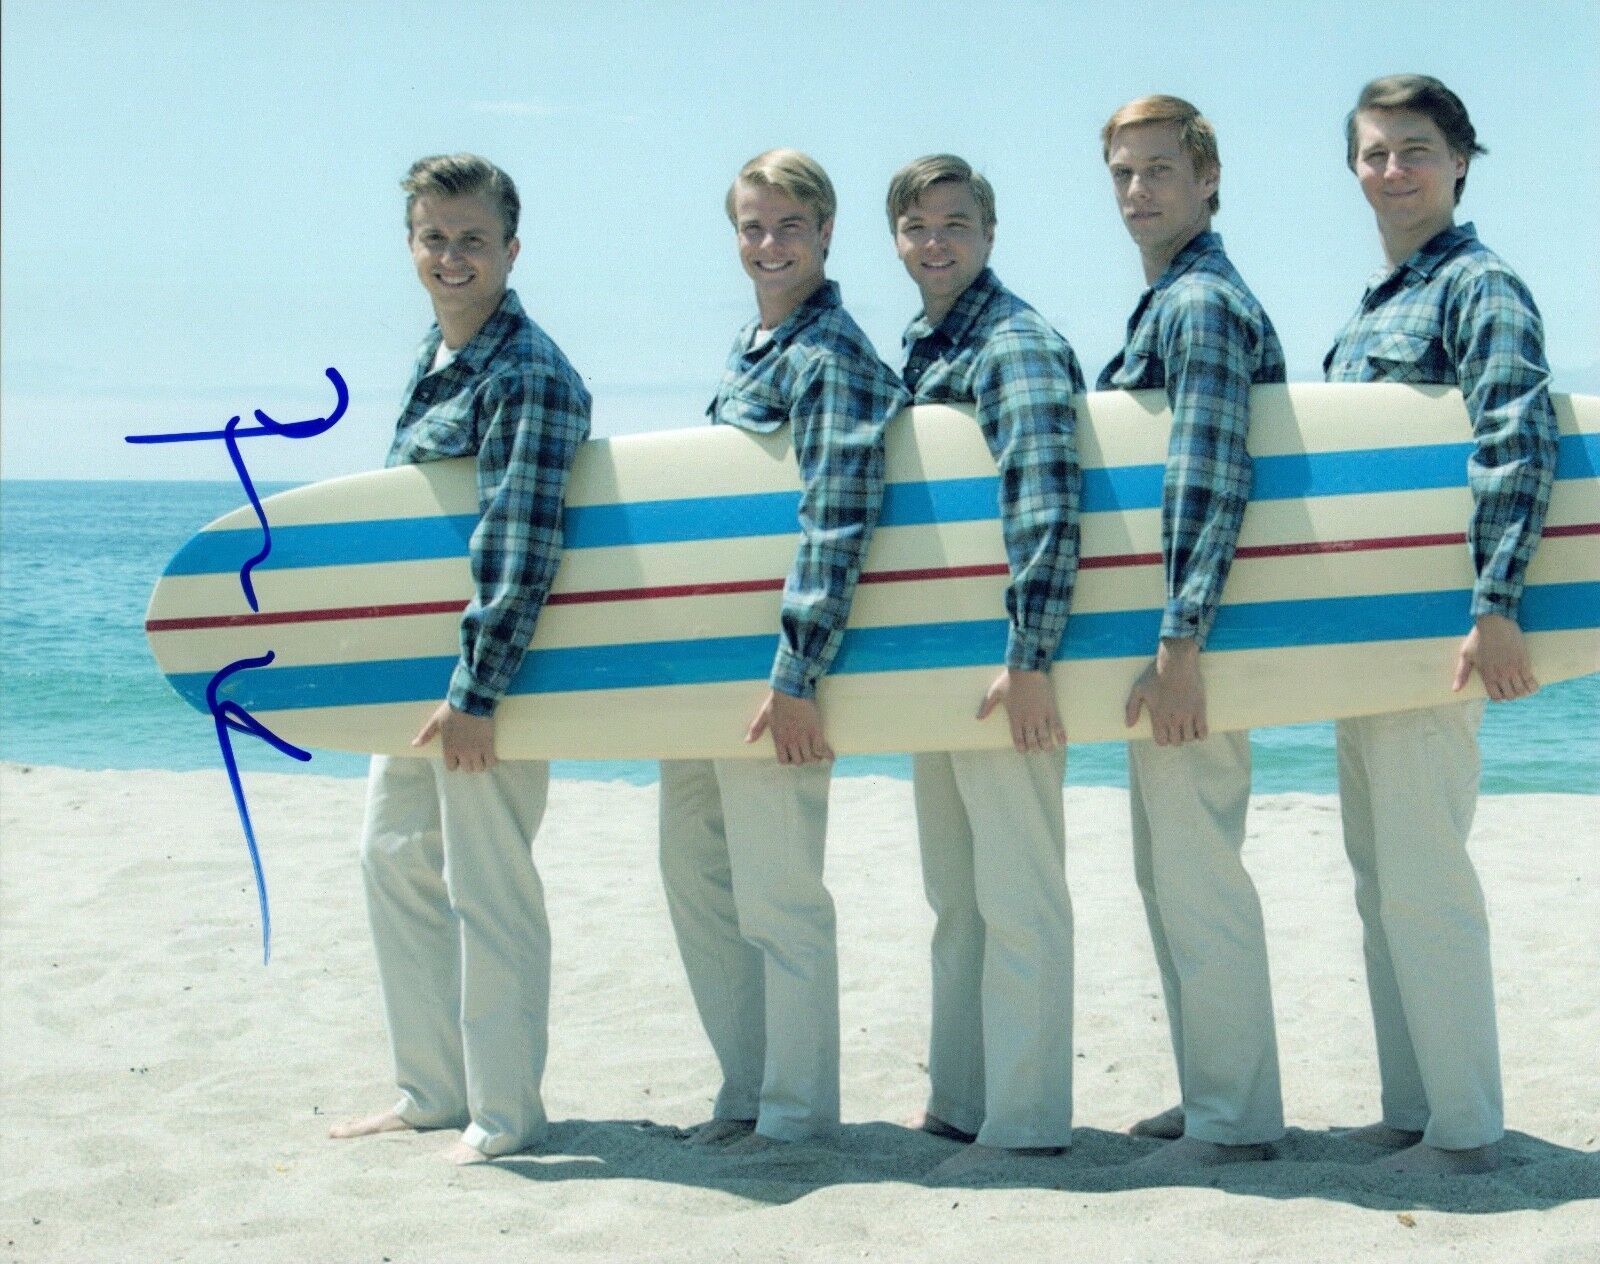 Paul Dano Signed Autograph 8x10 Photo Poster painting LOVE & MERCY Brian Wilson COA AB